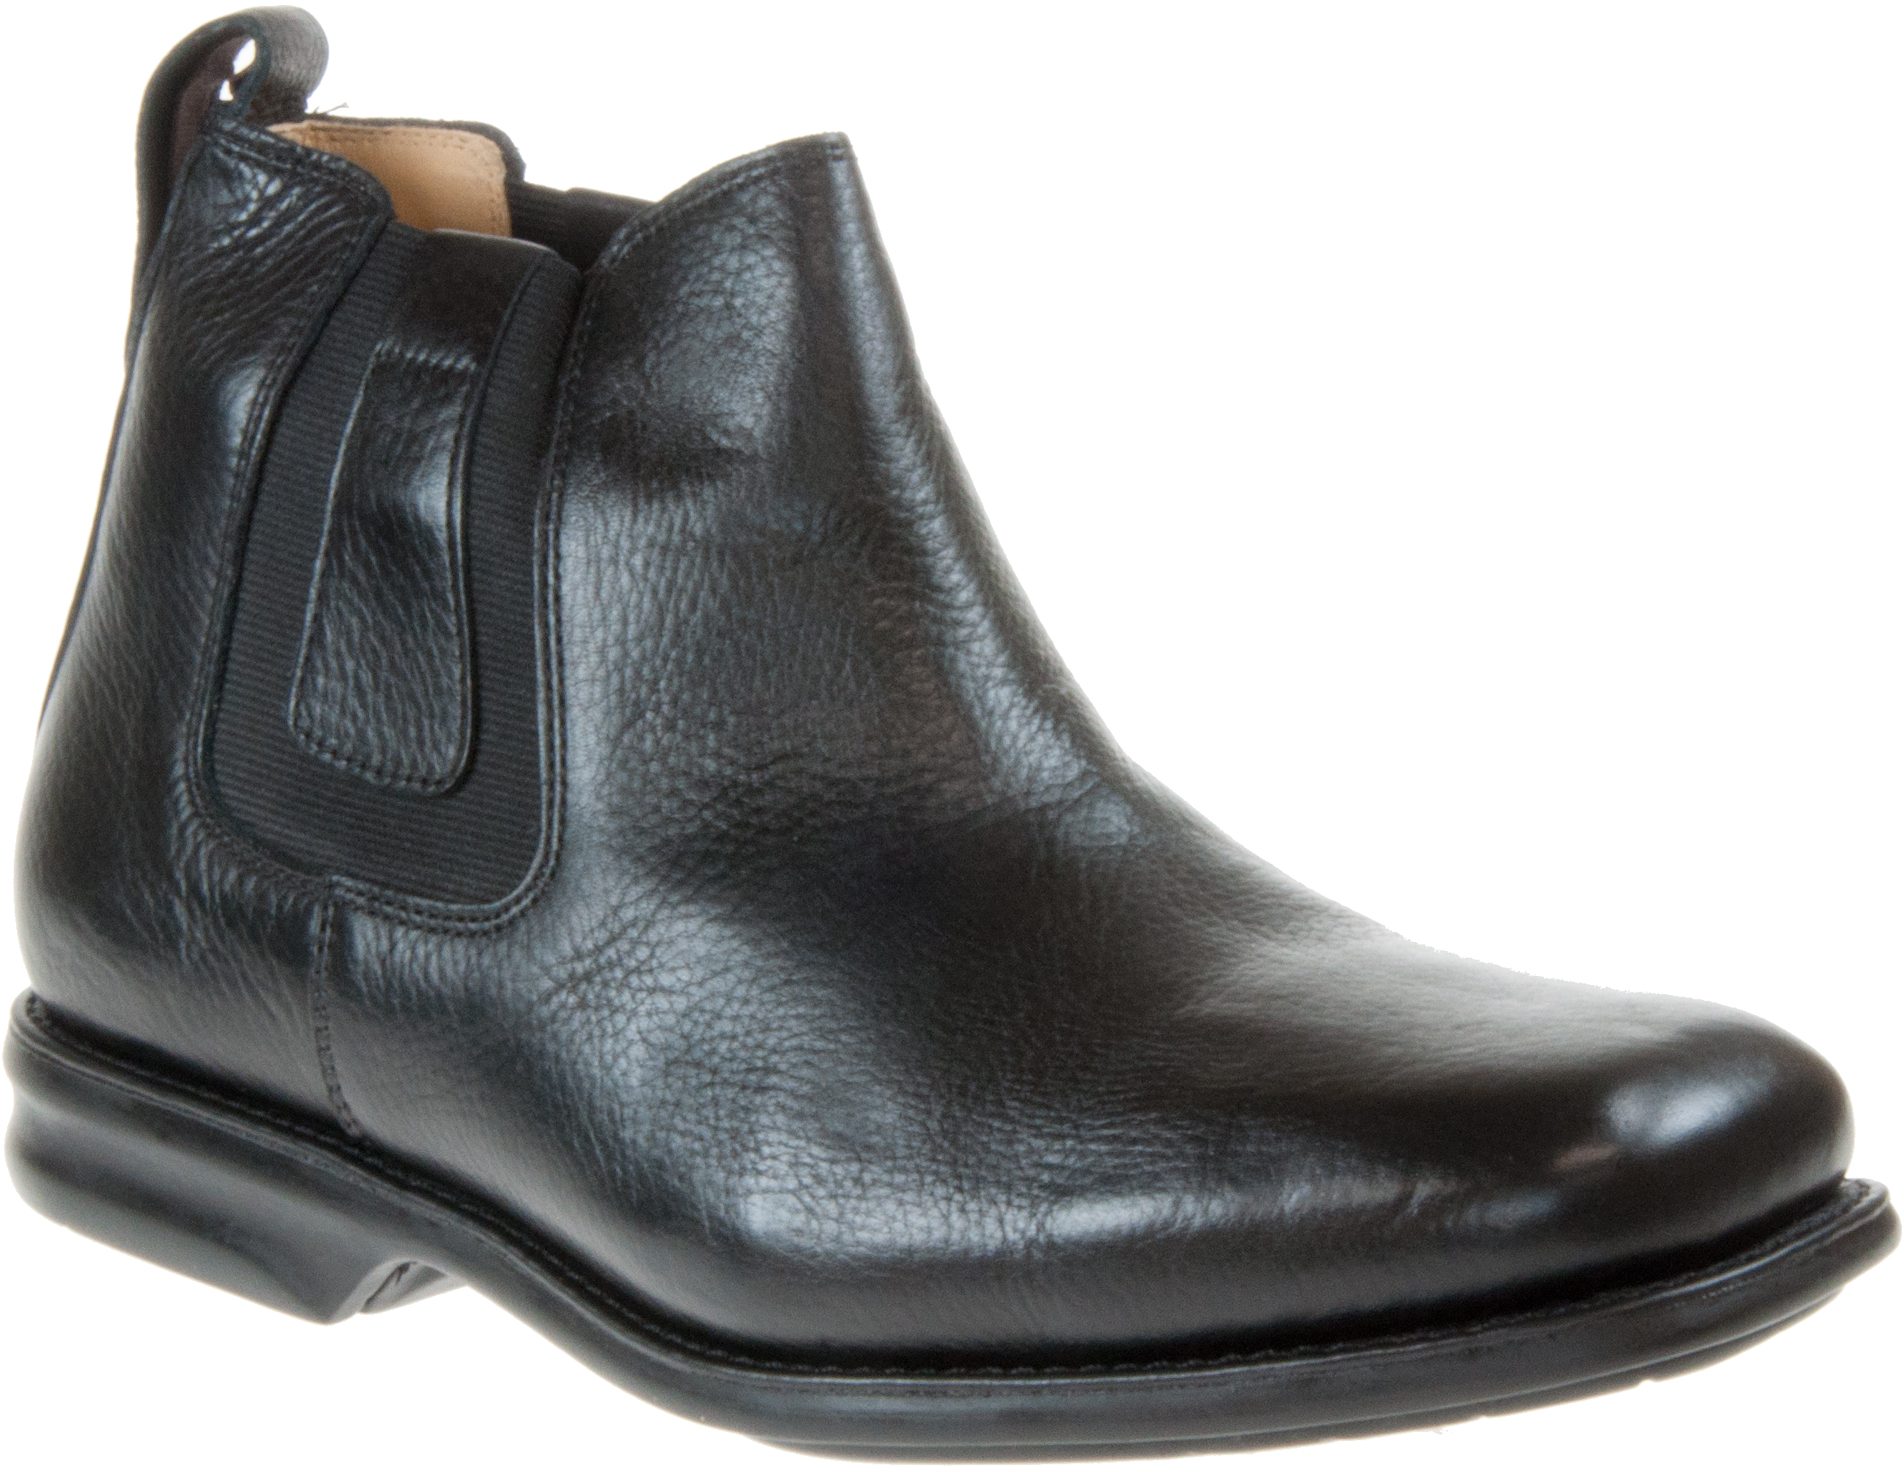 Anatomic & Co Amazonas Black 740353 - Formal Boots - Humphries Shoes